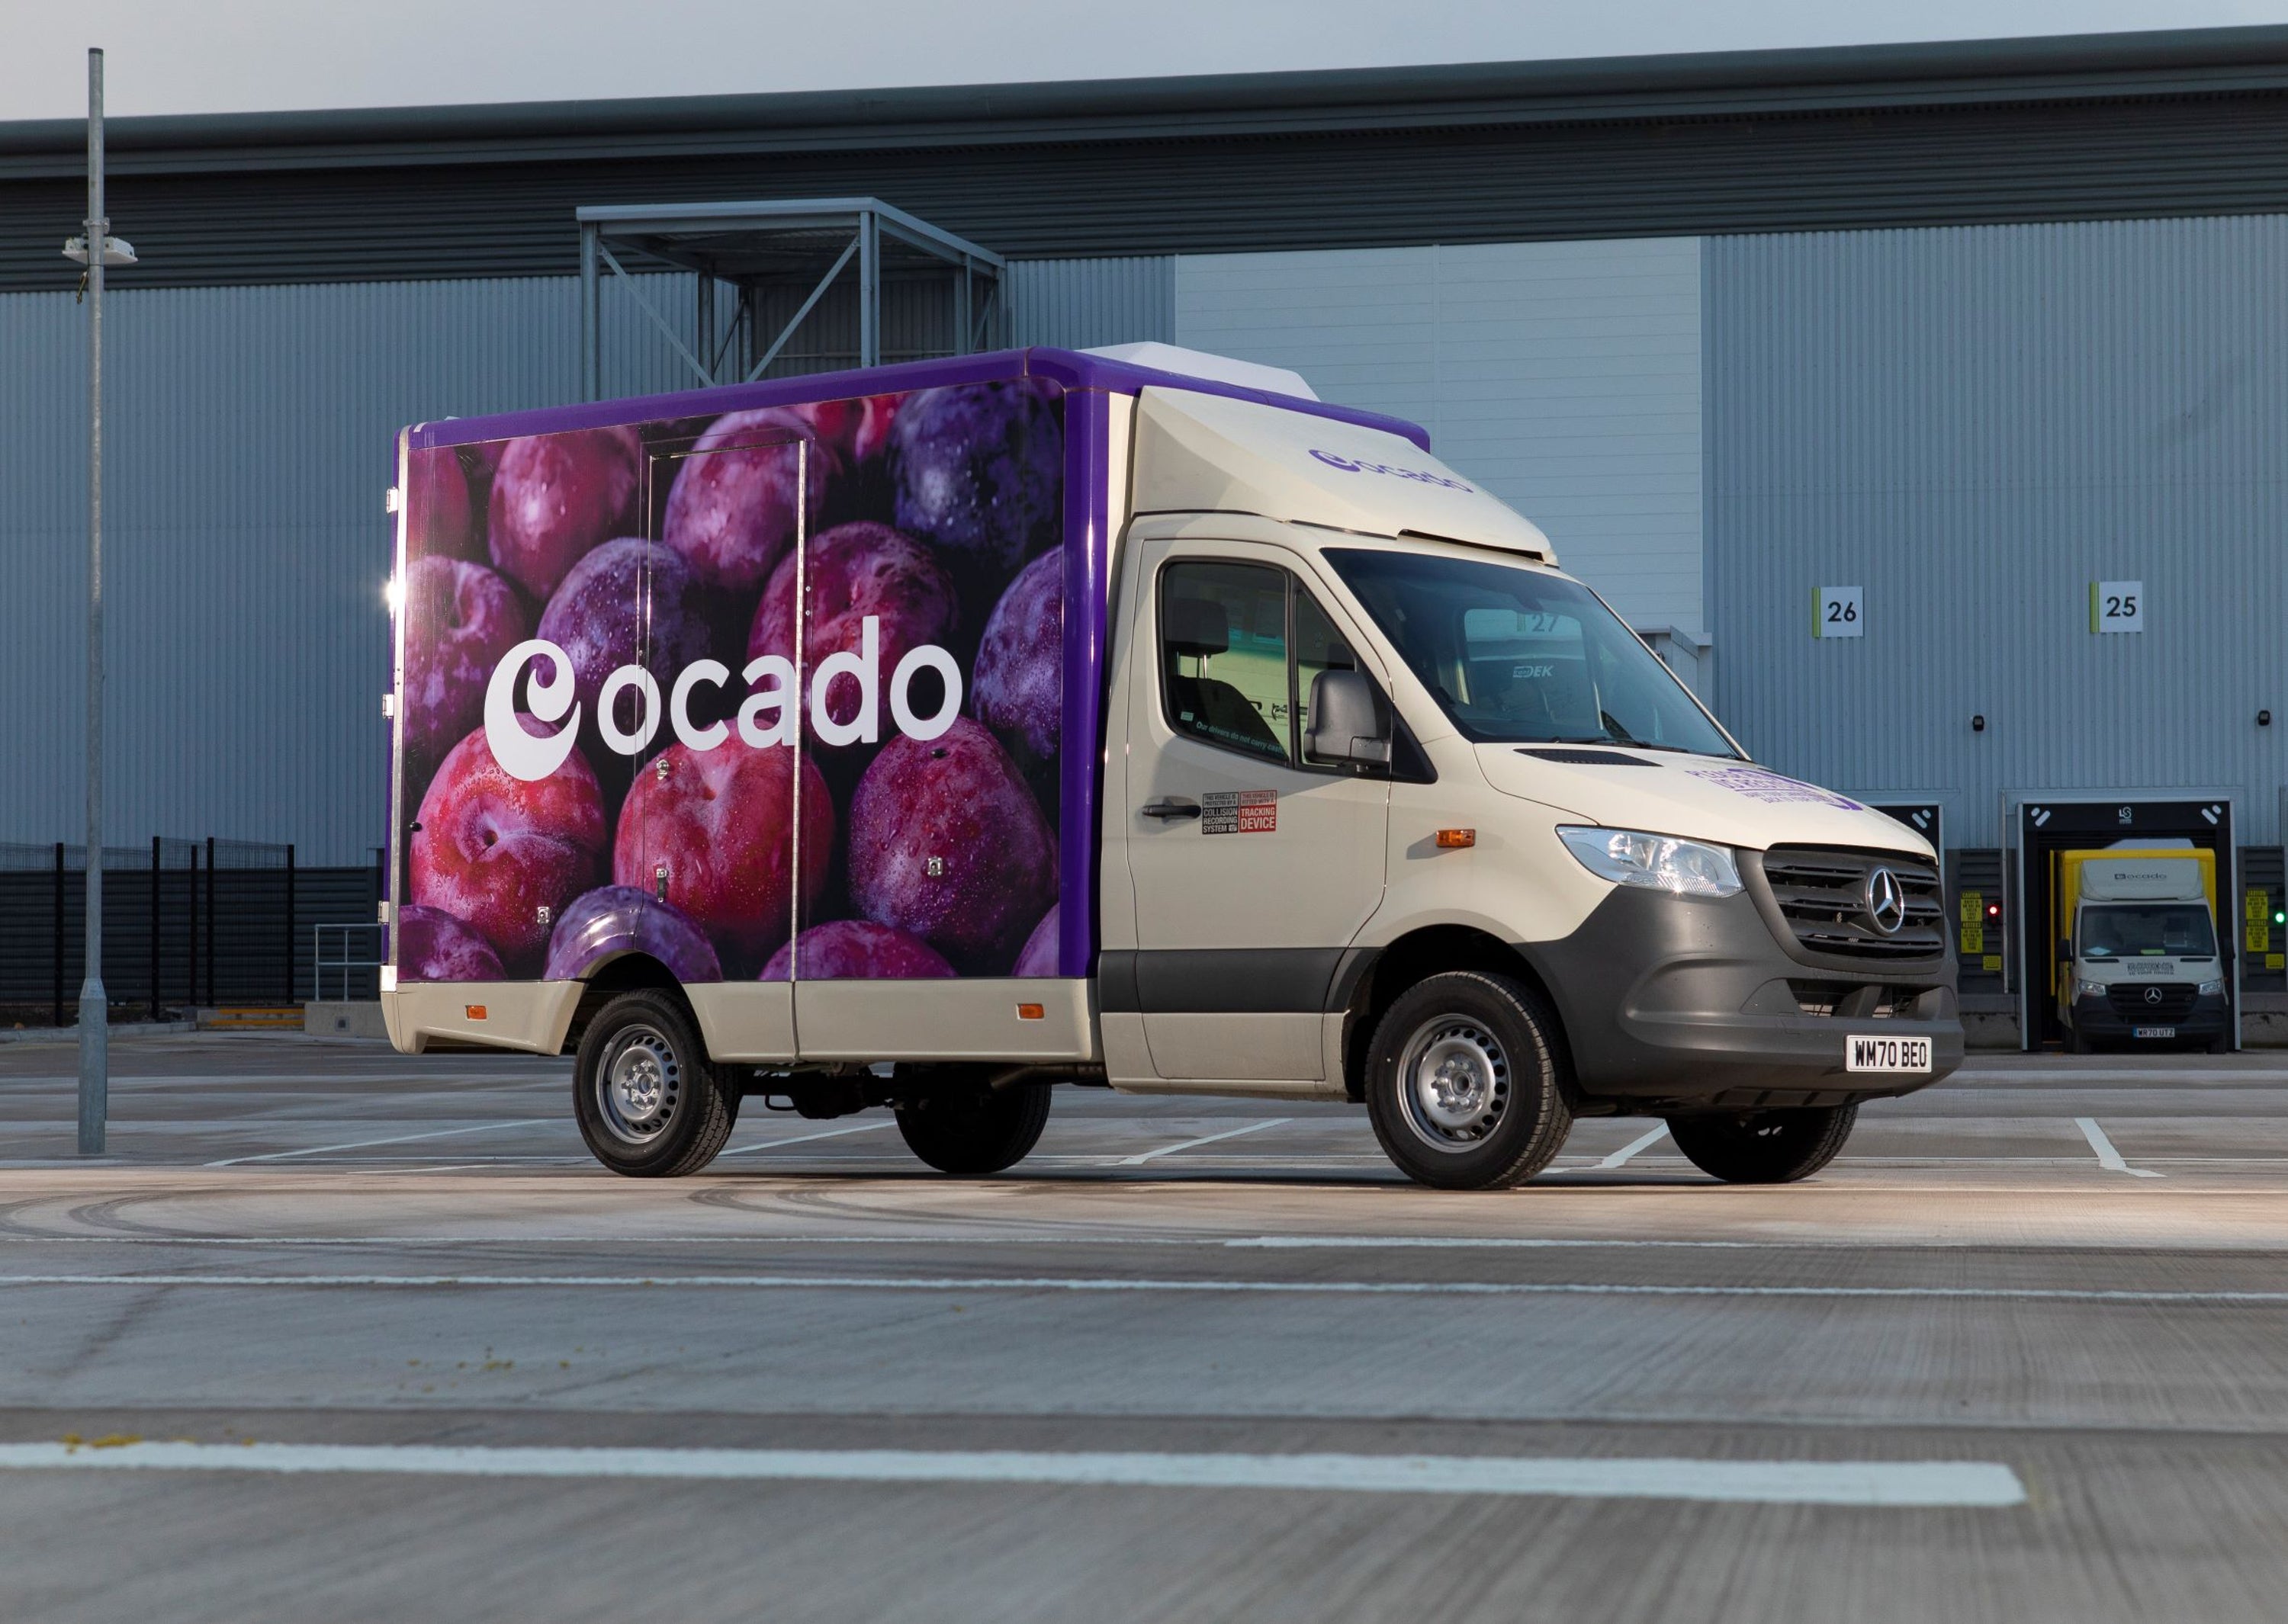 Ocado results show sales were up but heavy investment hit profits (Ocado/PA)